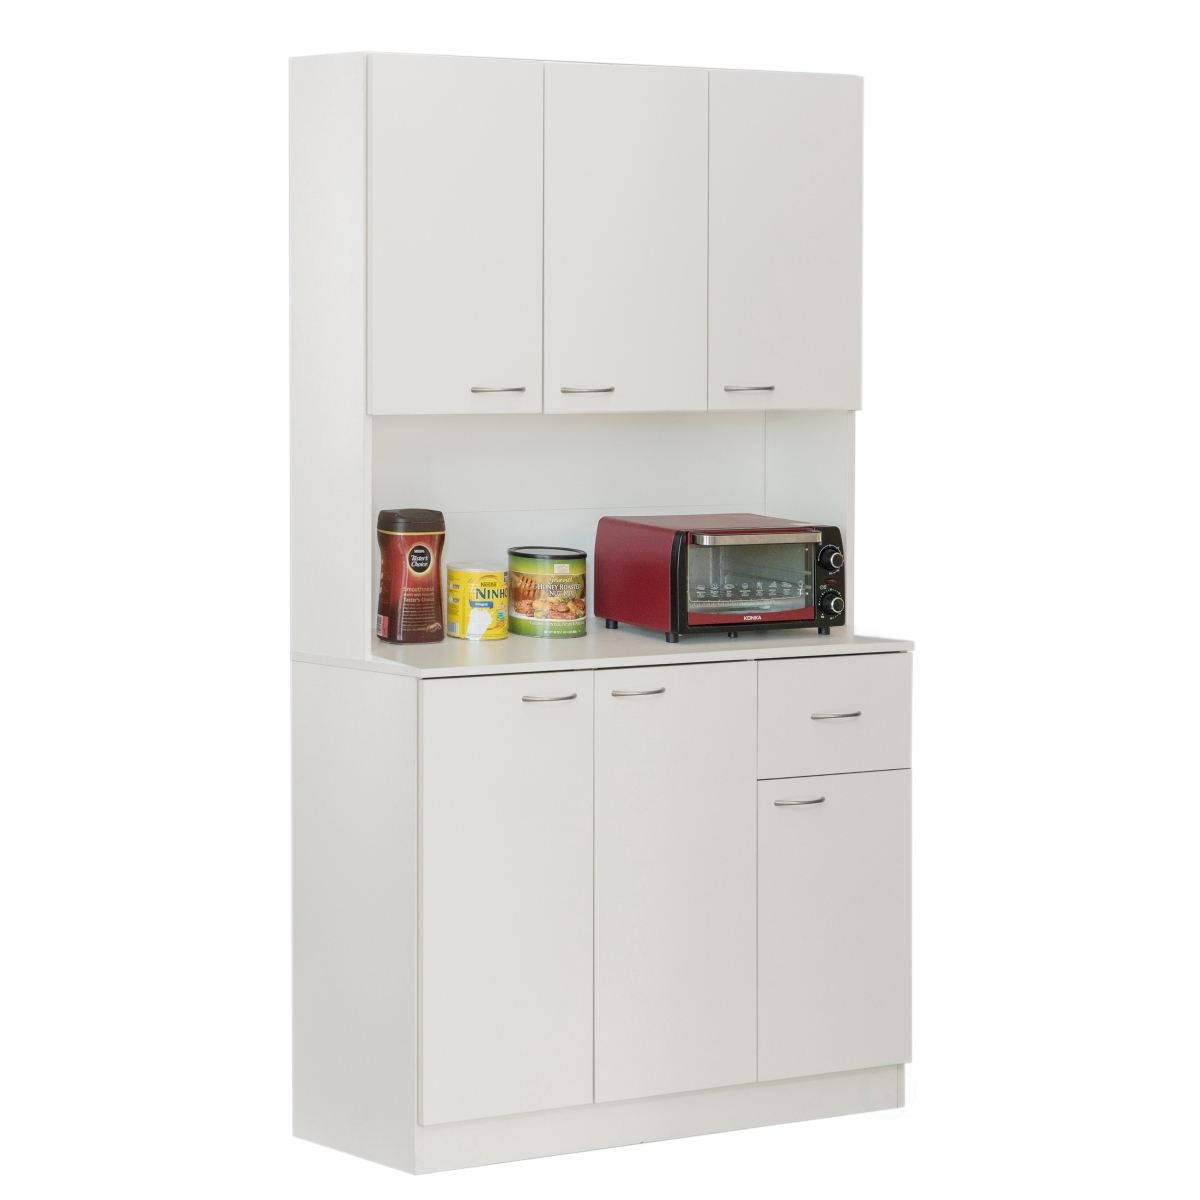 Basicwise QI004411L Wooden Kitchen Pantry Storage Cabinet with Drawer, Doors and Shelves, White